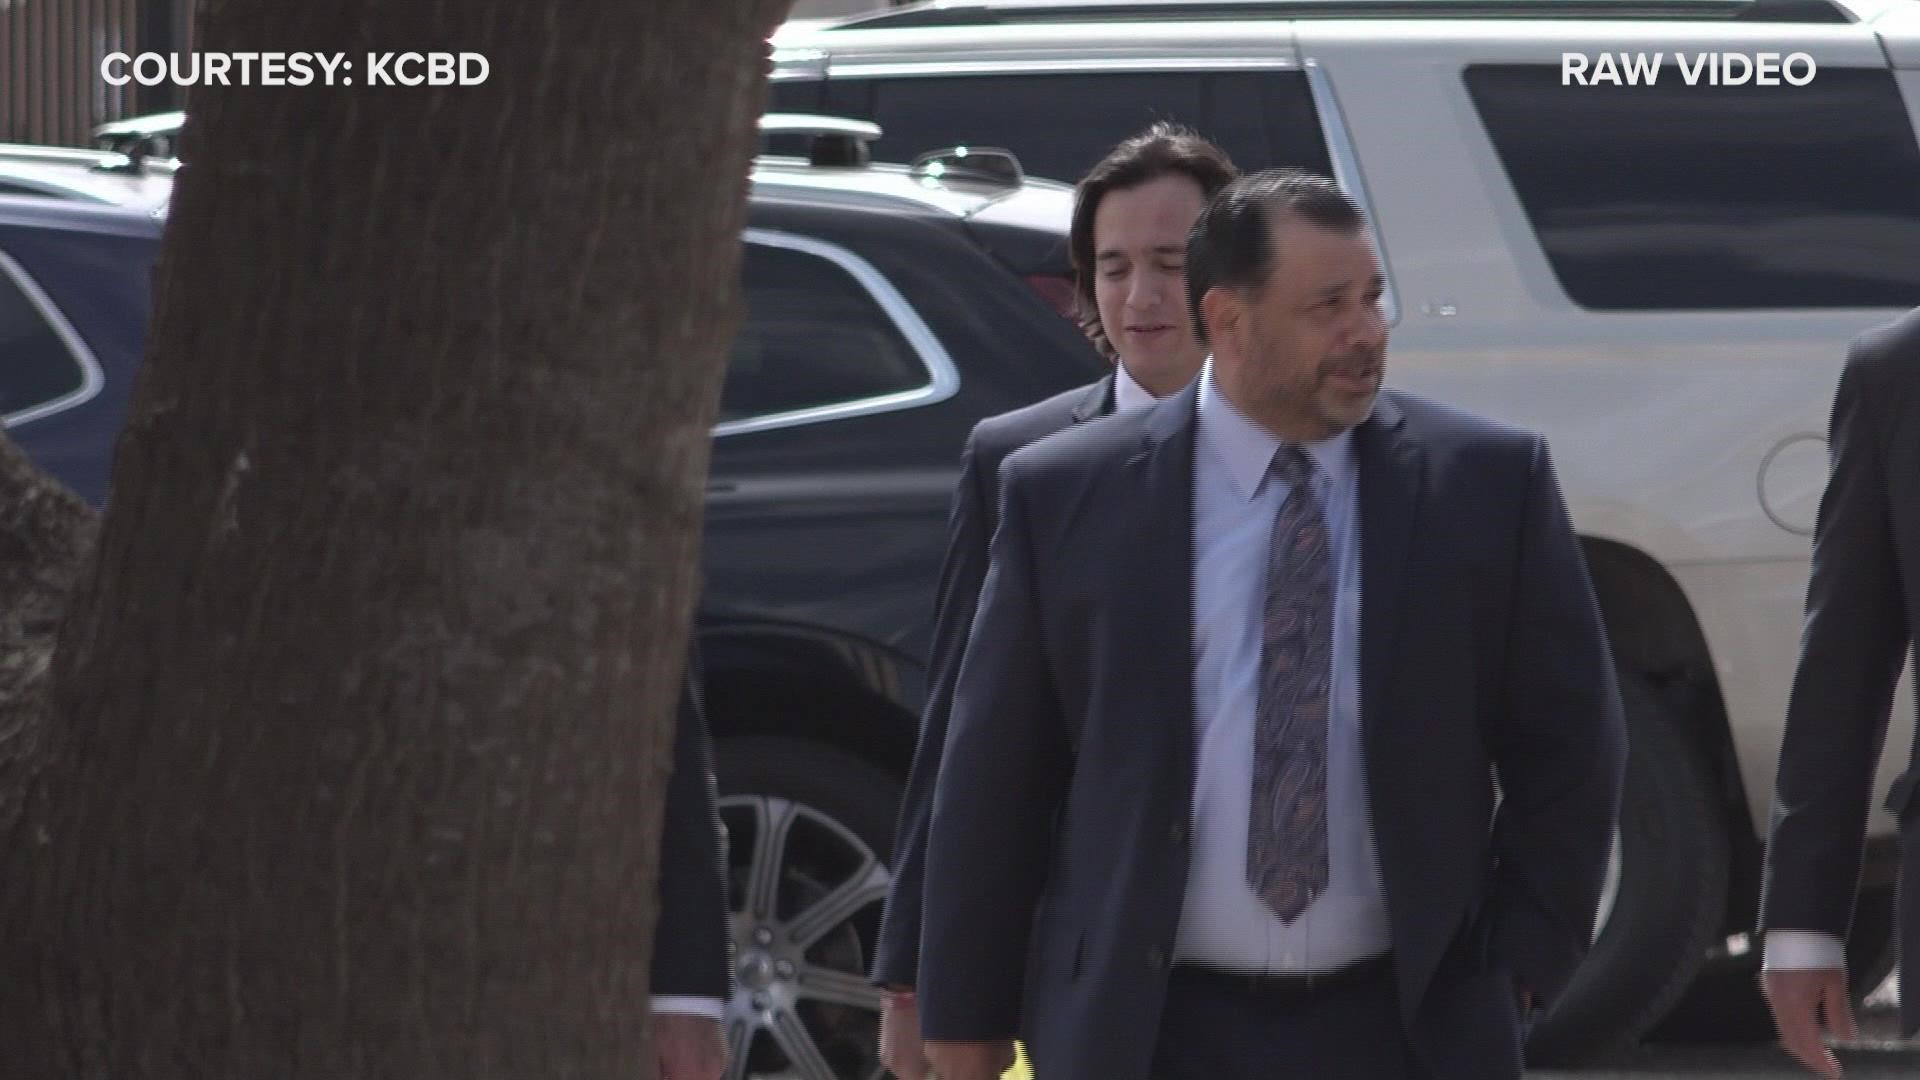 Opening arguments commenced in the trial of former San Angelo Police Chief Tim Vasquez Monday.